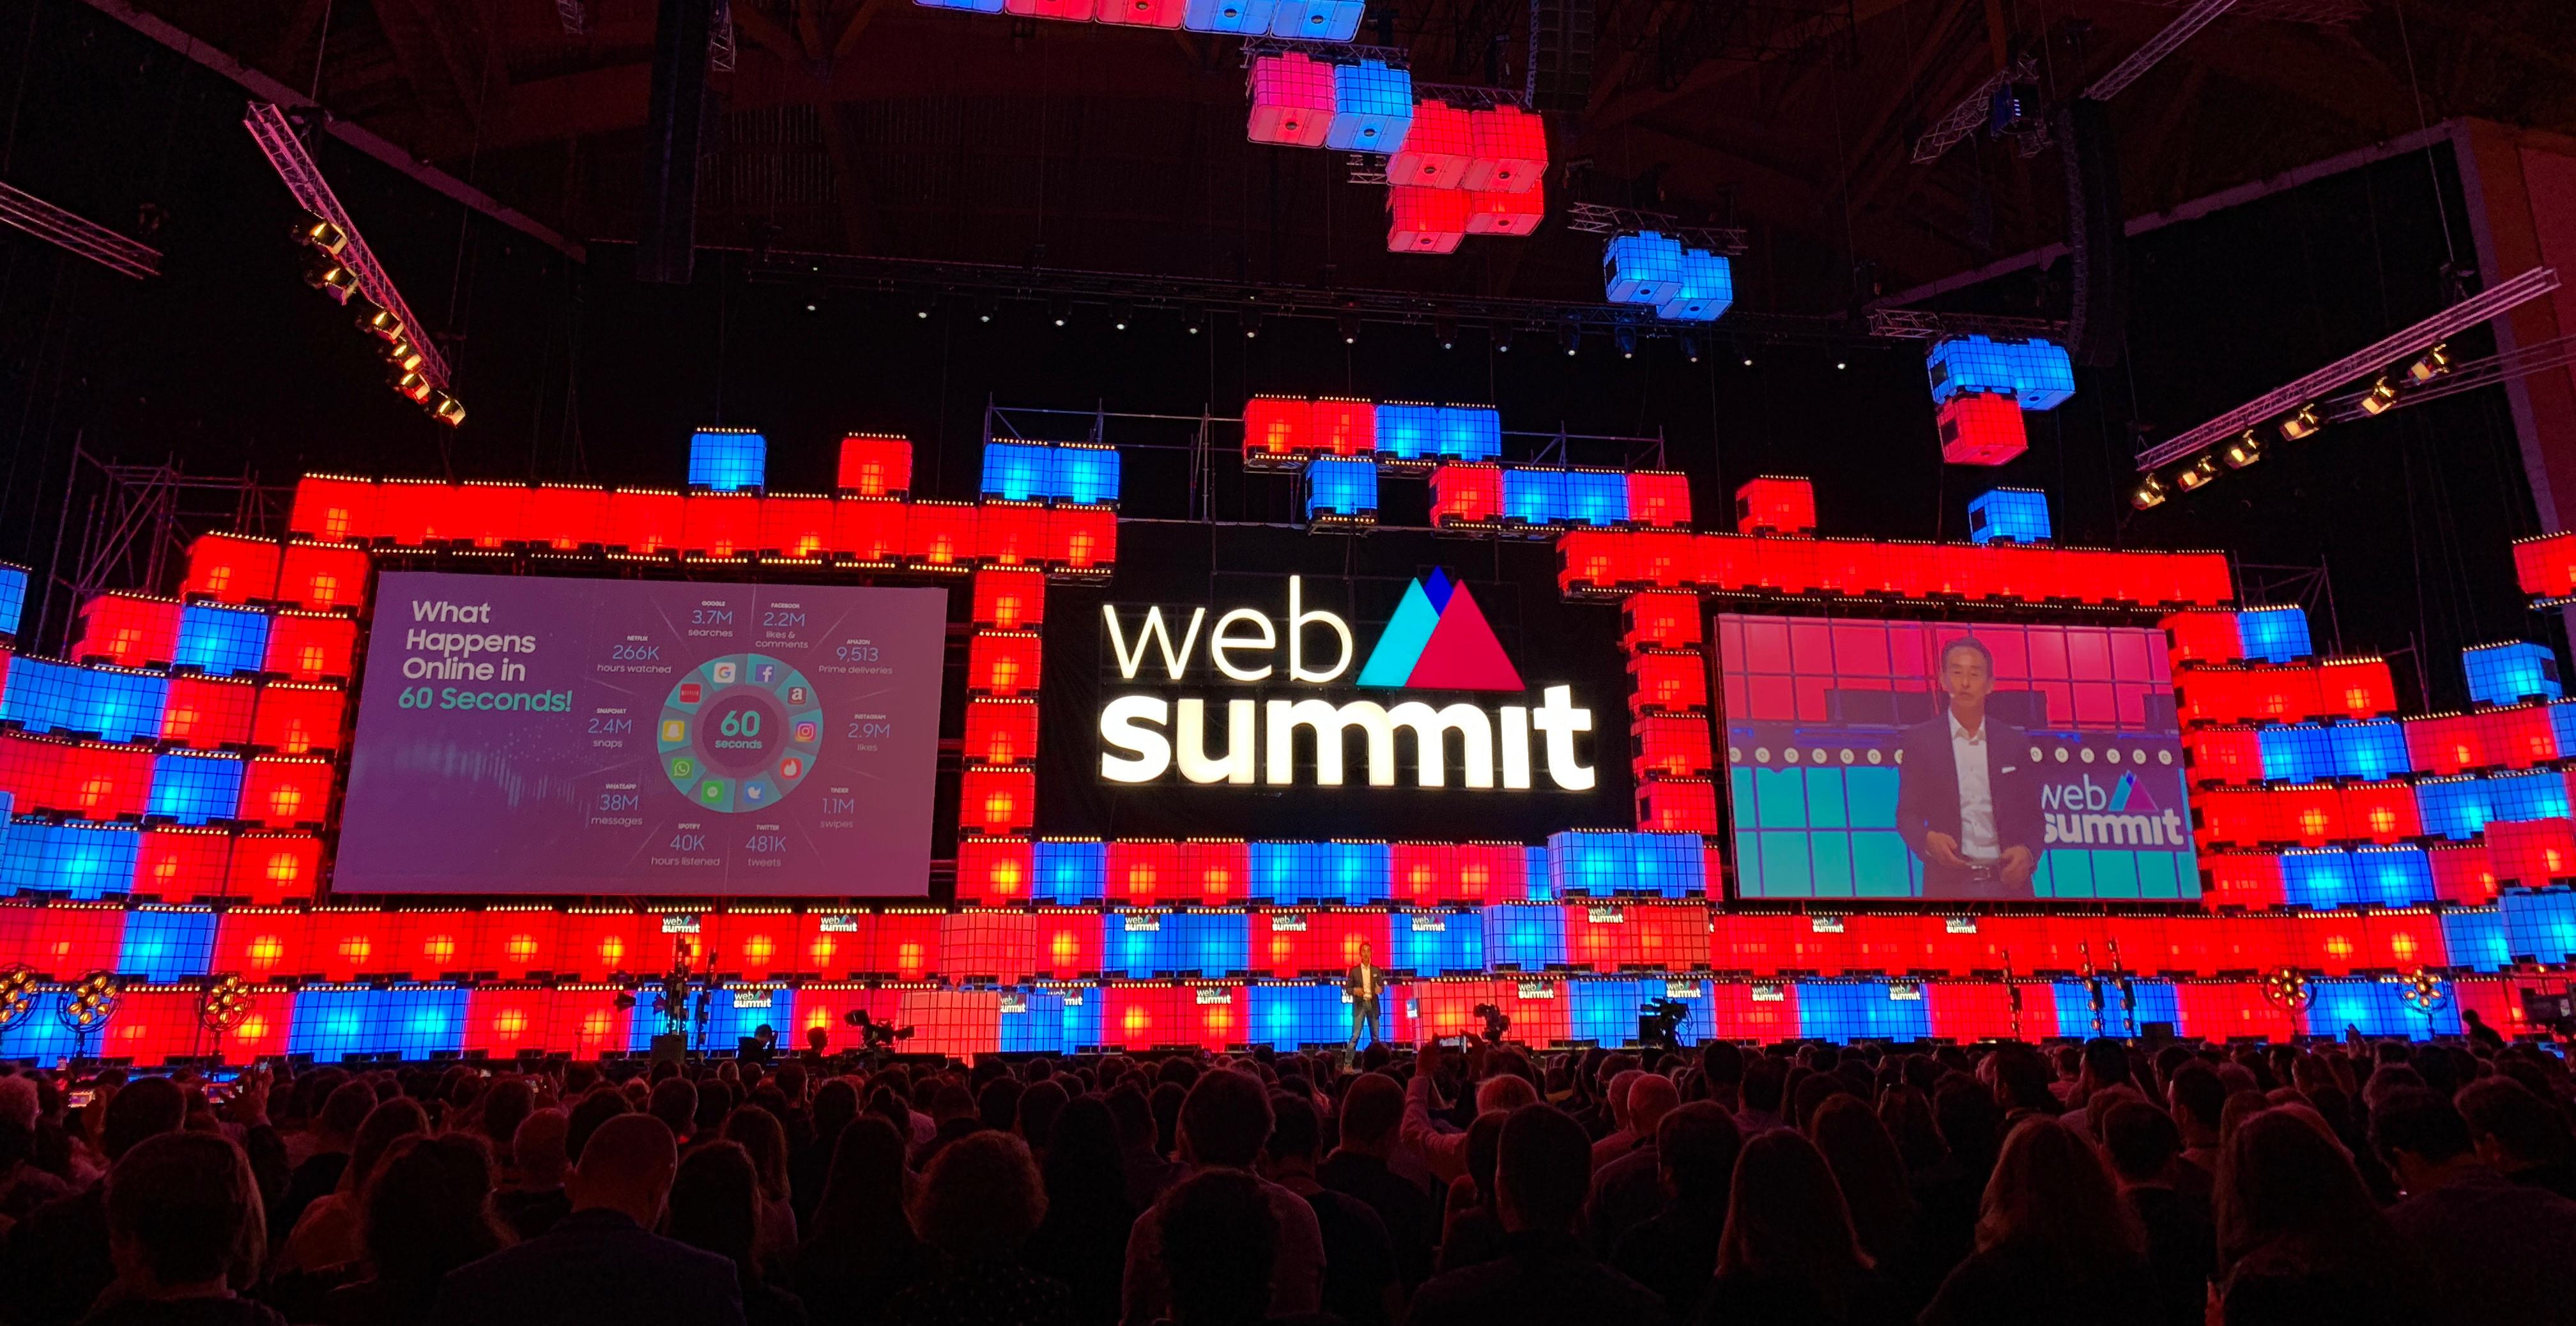 Augmented reality is here to disrupt the industry: Insights from Web Summit 2018